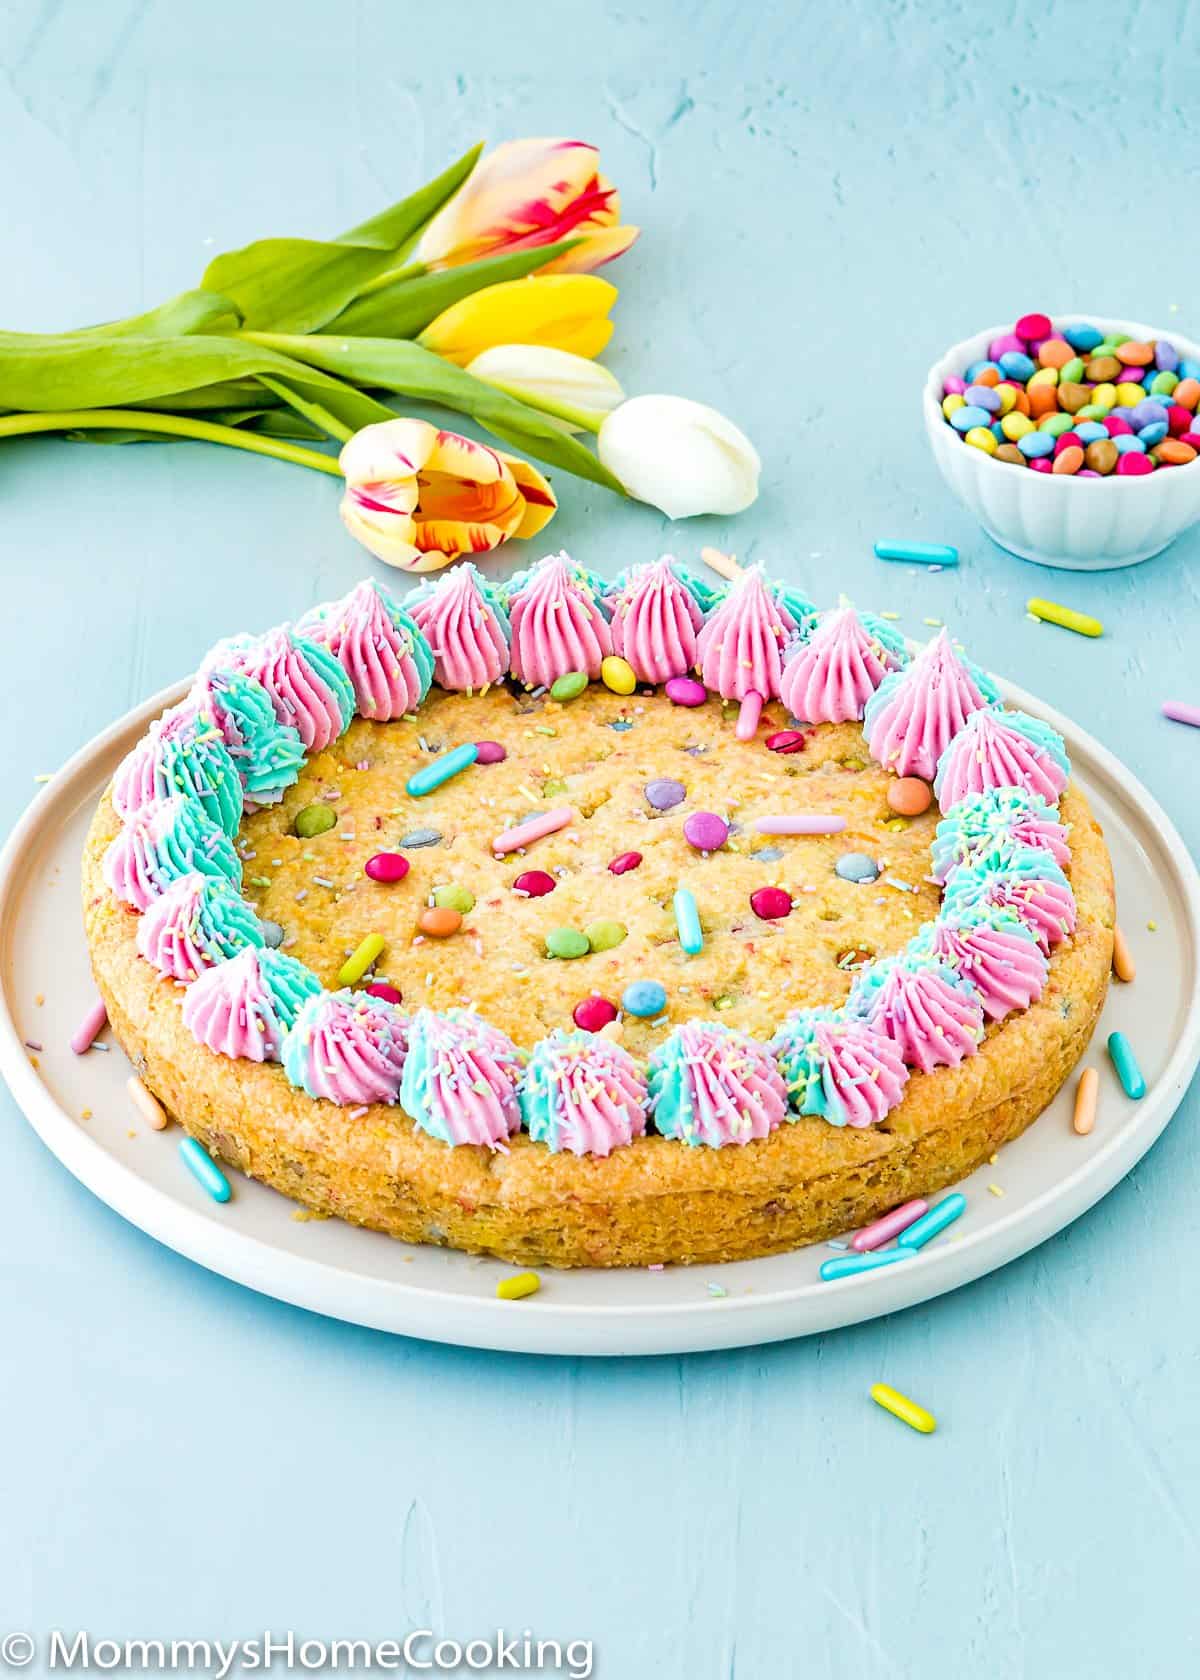 Top more than 75 cookie cake decorations latest